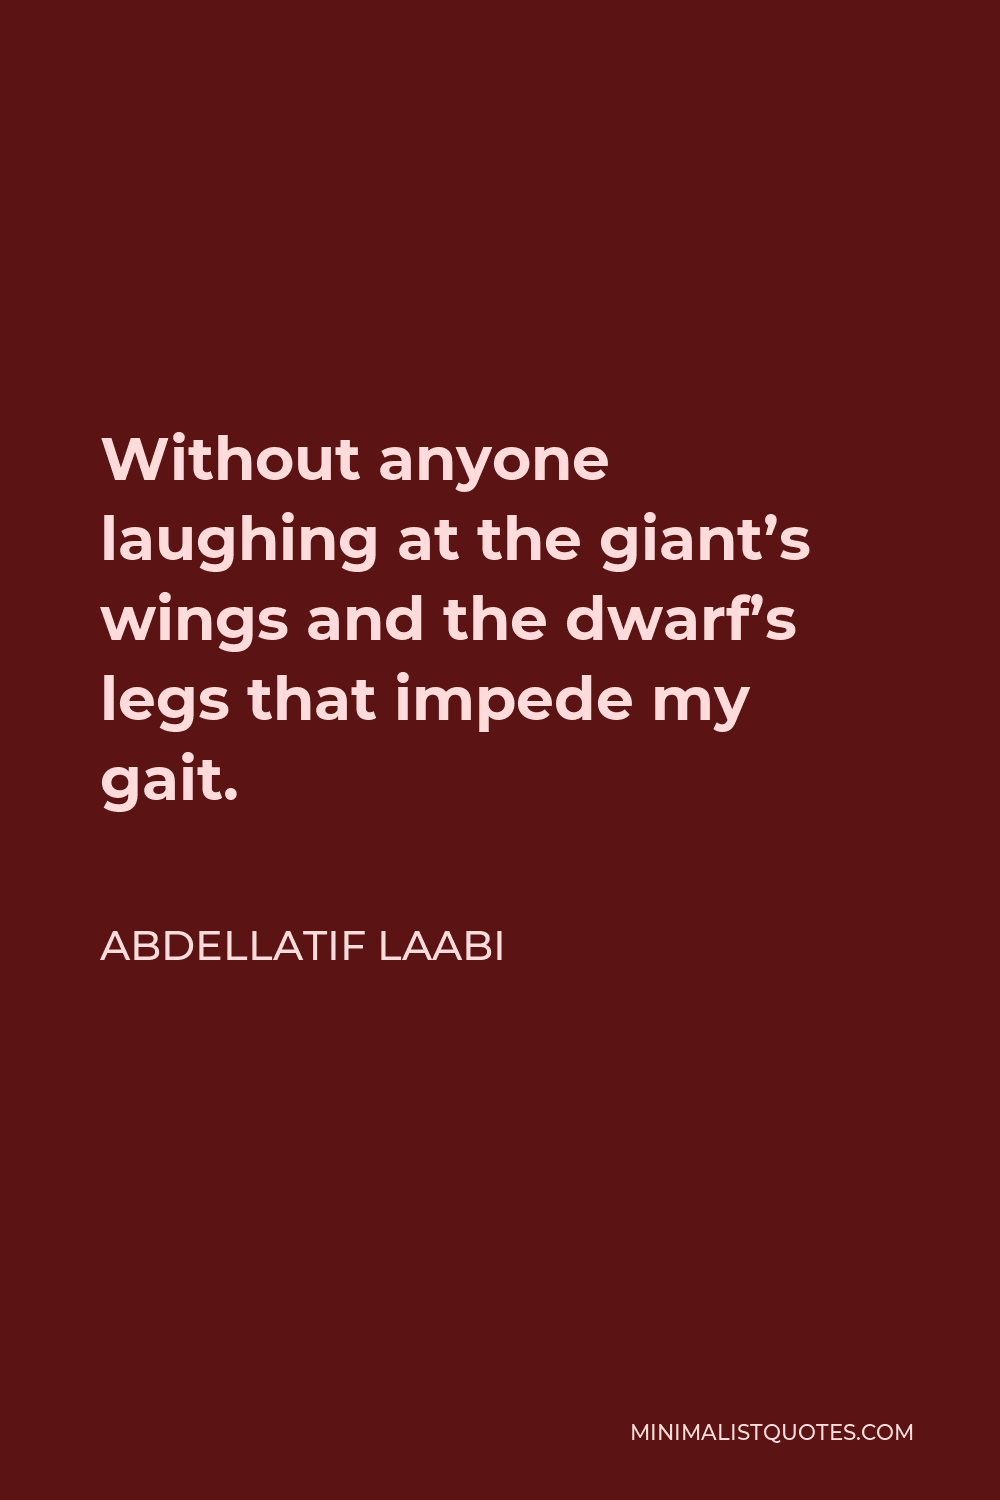 Abdellatif Laabi Quote - Without anyone laughing at the giant’s wings and the dwarf’s legs that impede my gait.